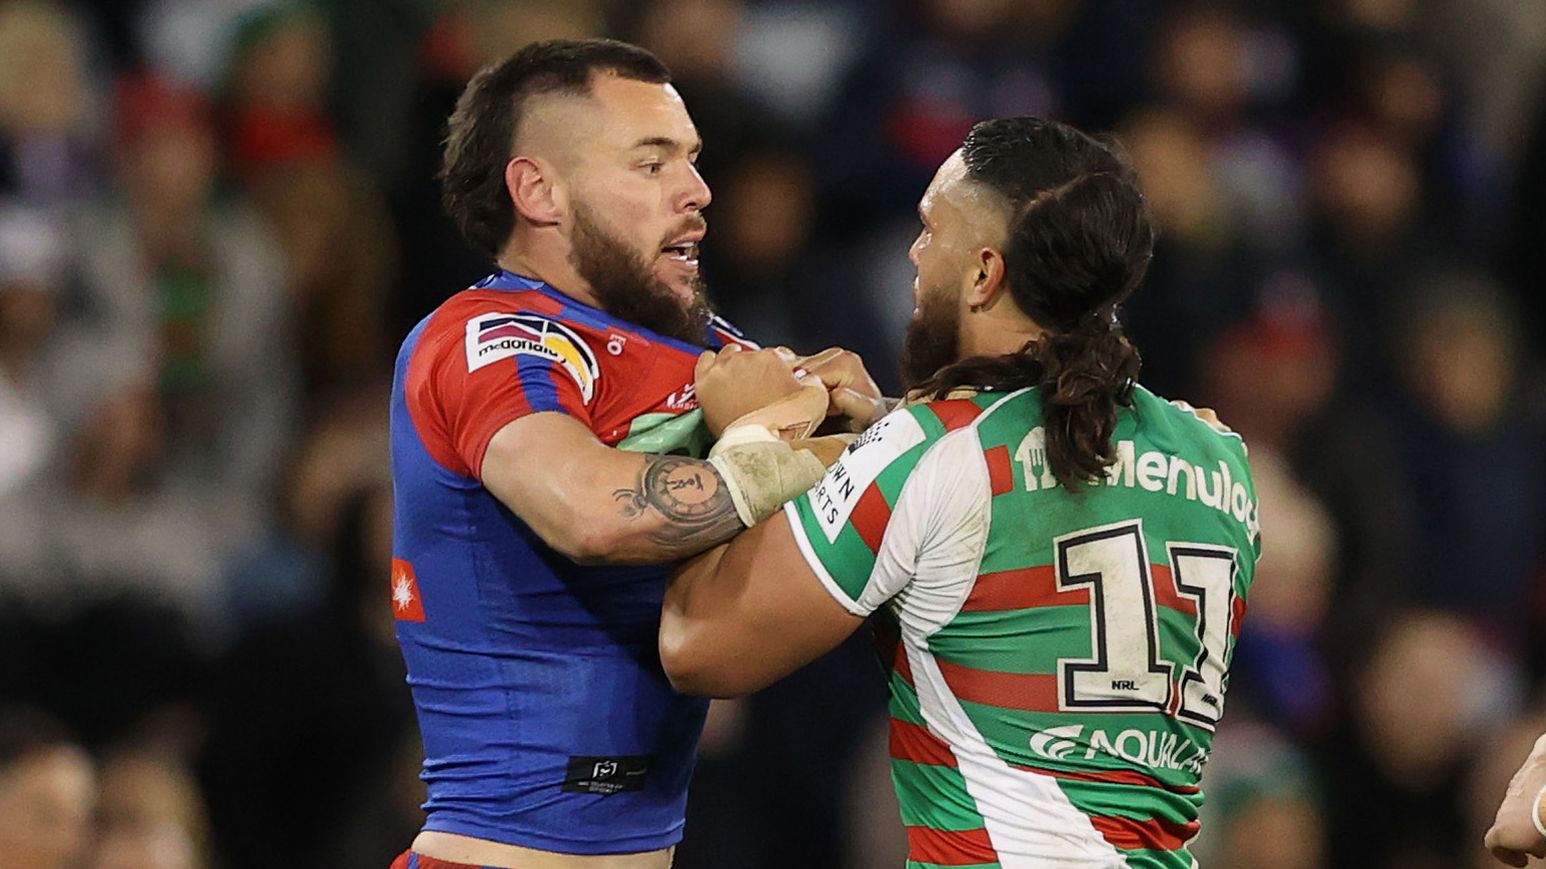 EXCLUSIVE: There is more to David Klemmer's axing than Newcastle is willing to reveal, says Phil Gould